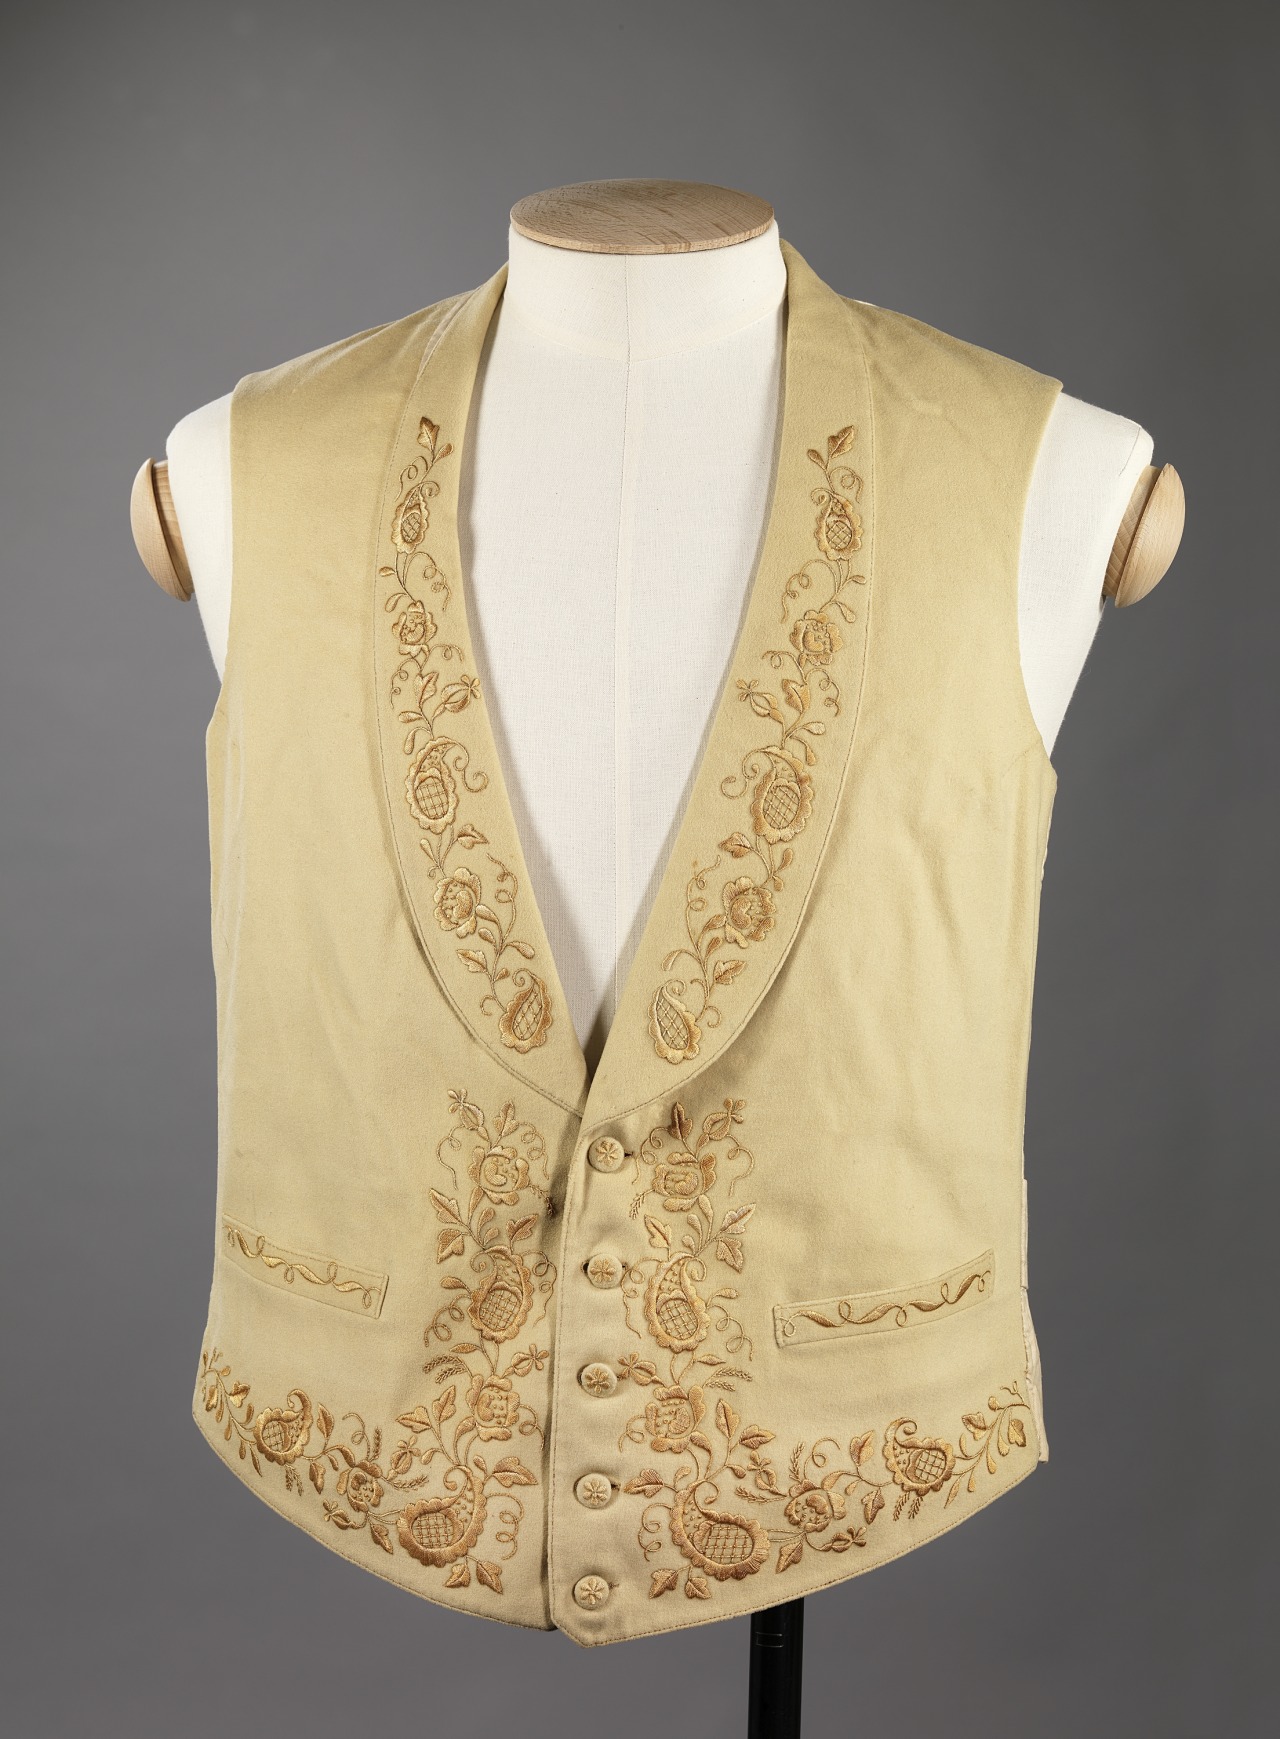 19th Century Blog | aneacostumes: Patterned male waistcoats from the...